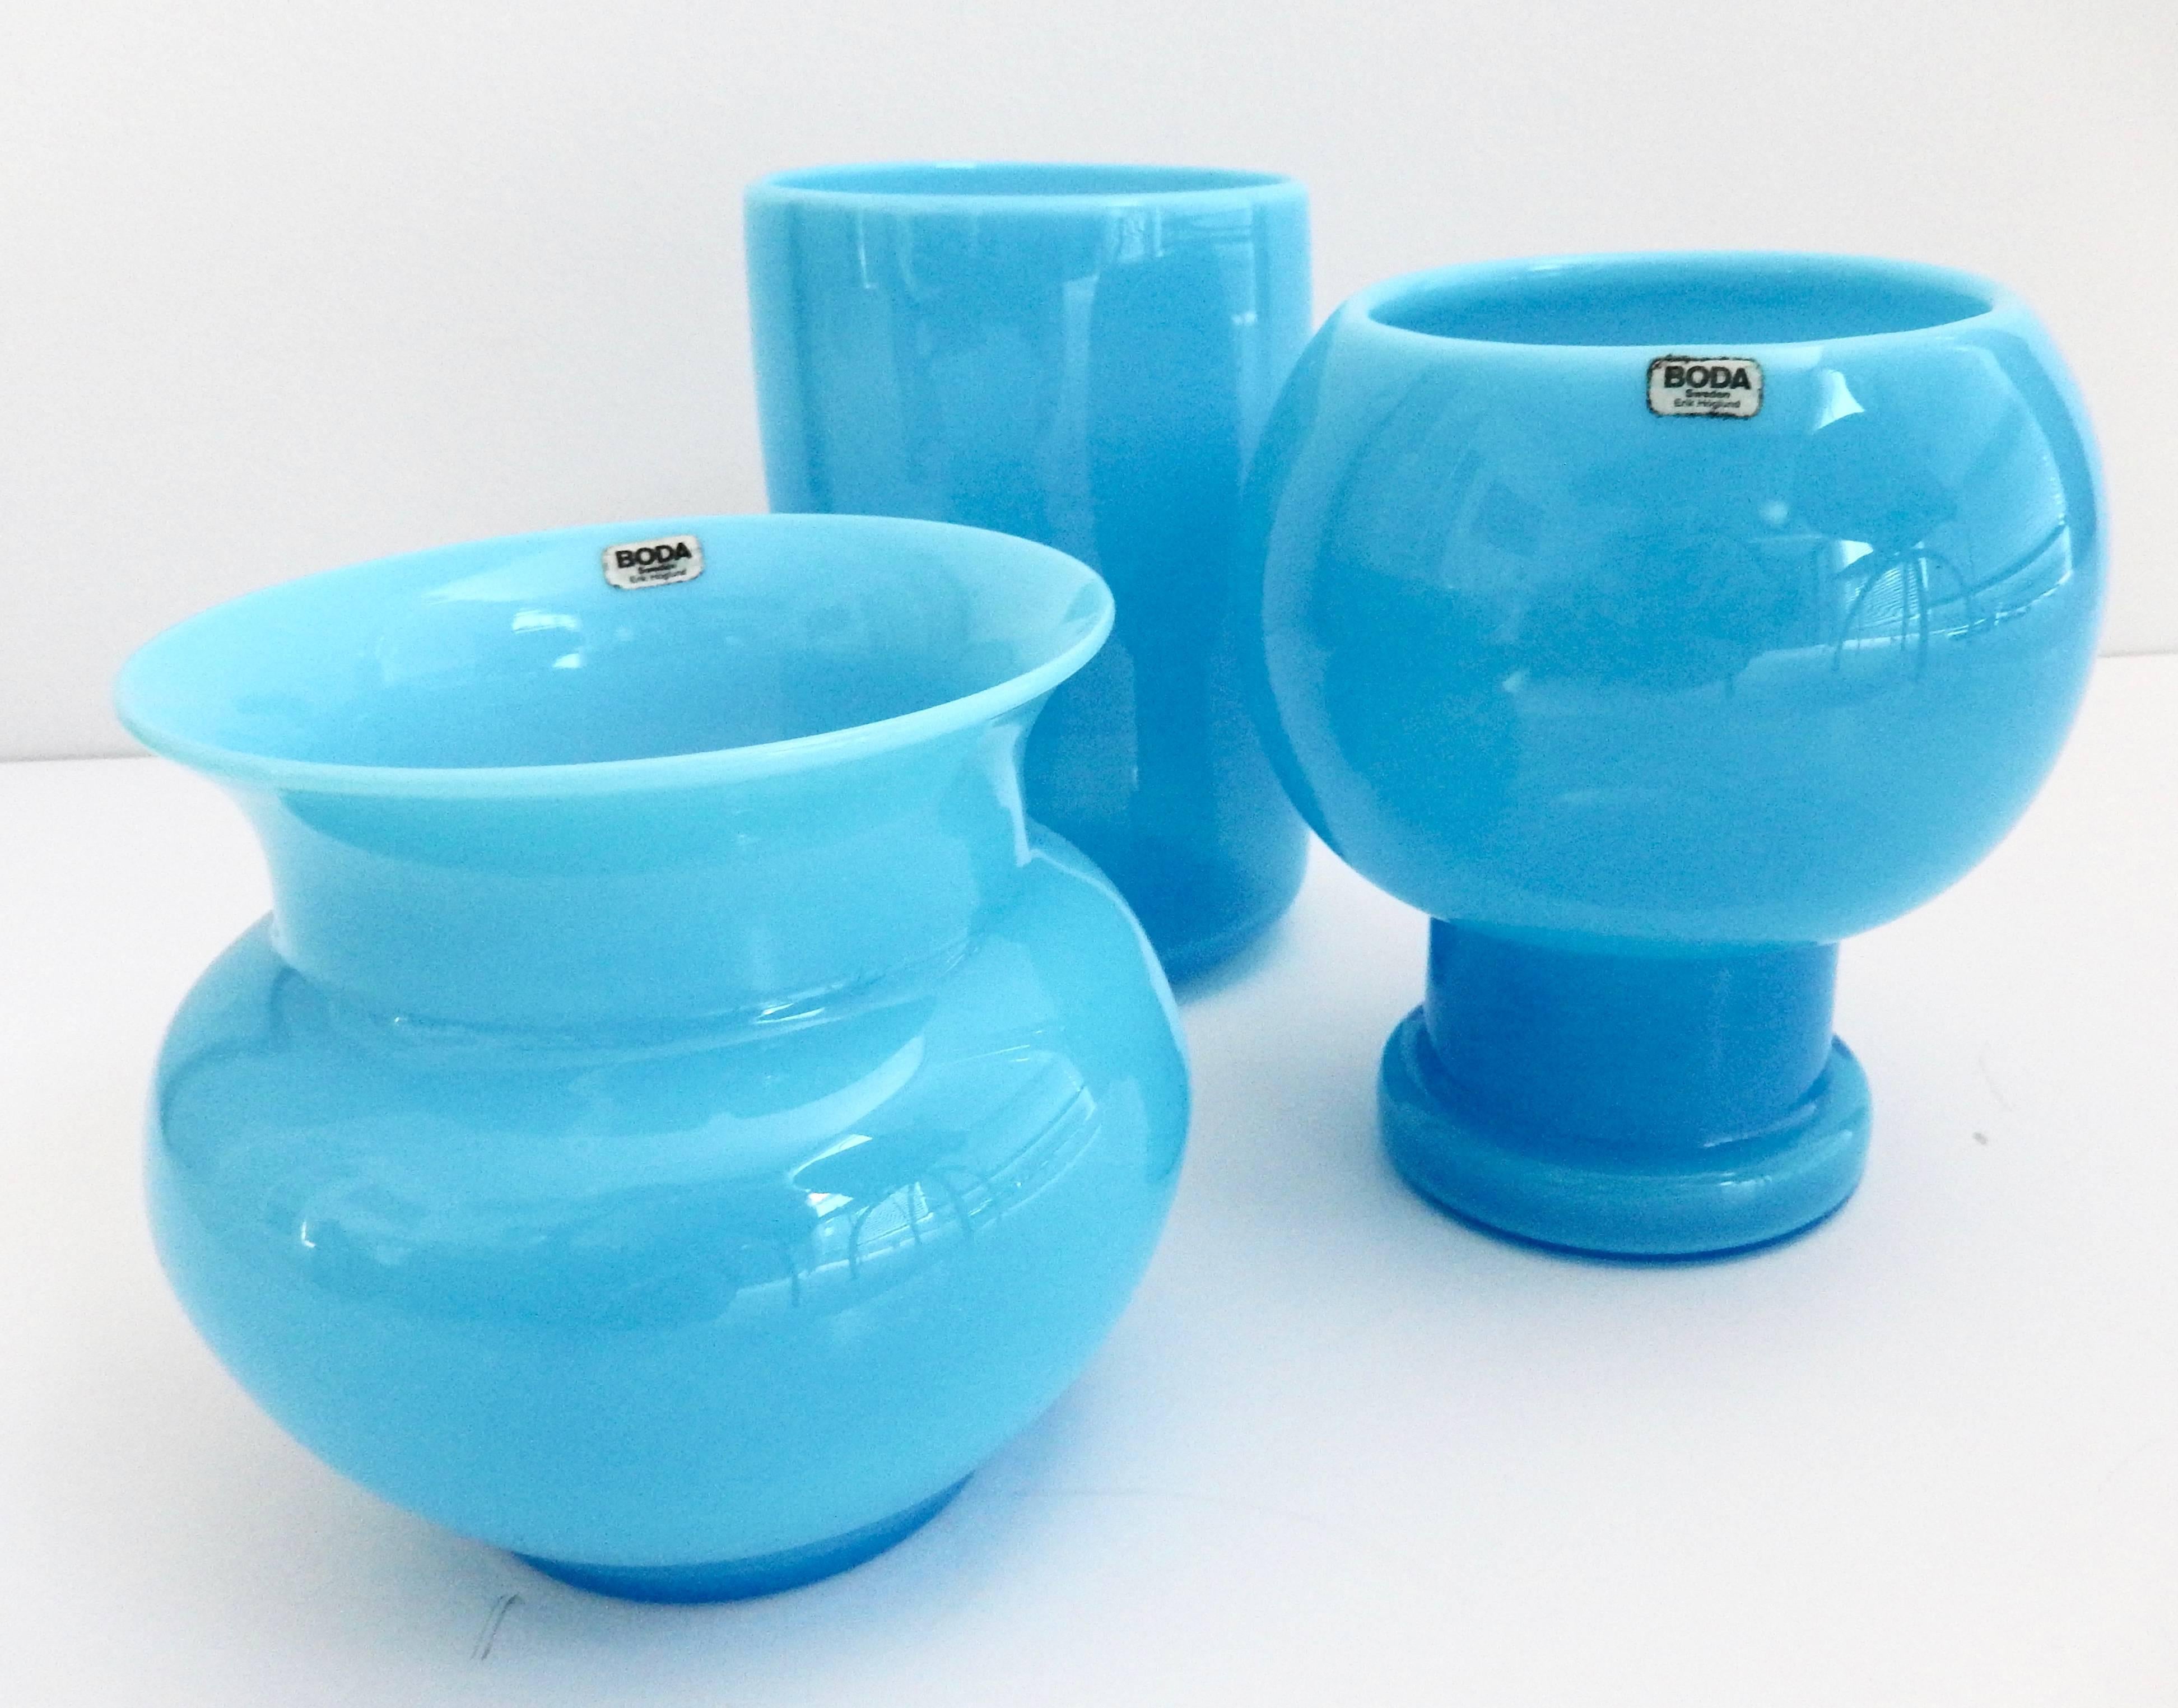 A collection of three opaque, richly-colored blue glass vases by the Swedish artist Erik Hoglund (1932-1998). Hoglund, a sculptor and graphic artist best-known for his innovative glass designs, collaborated with Boda Glasswork from 1953-1973. All